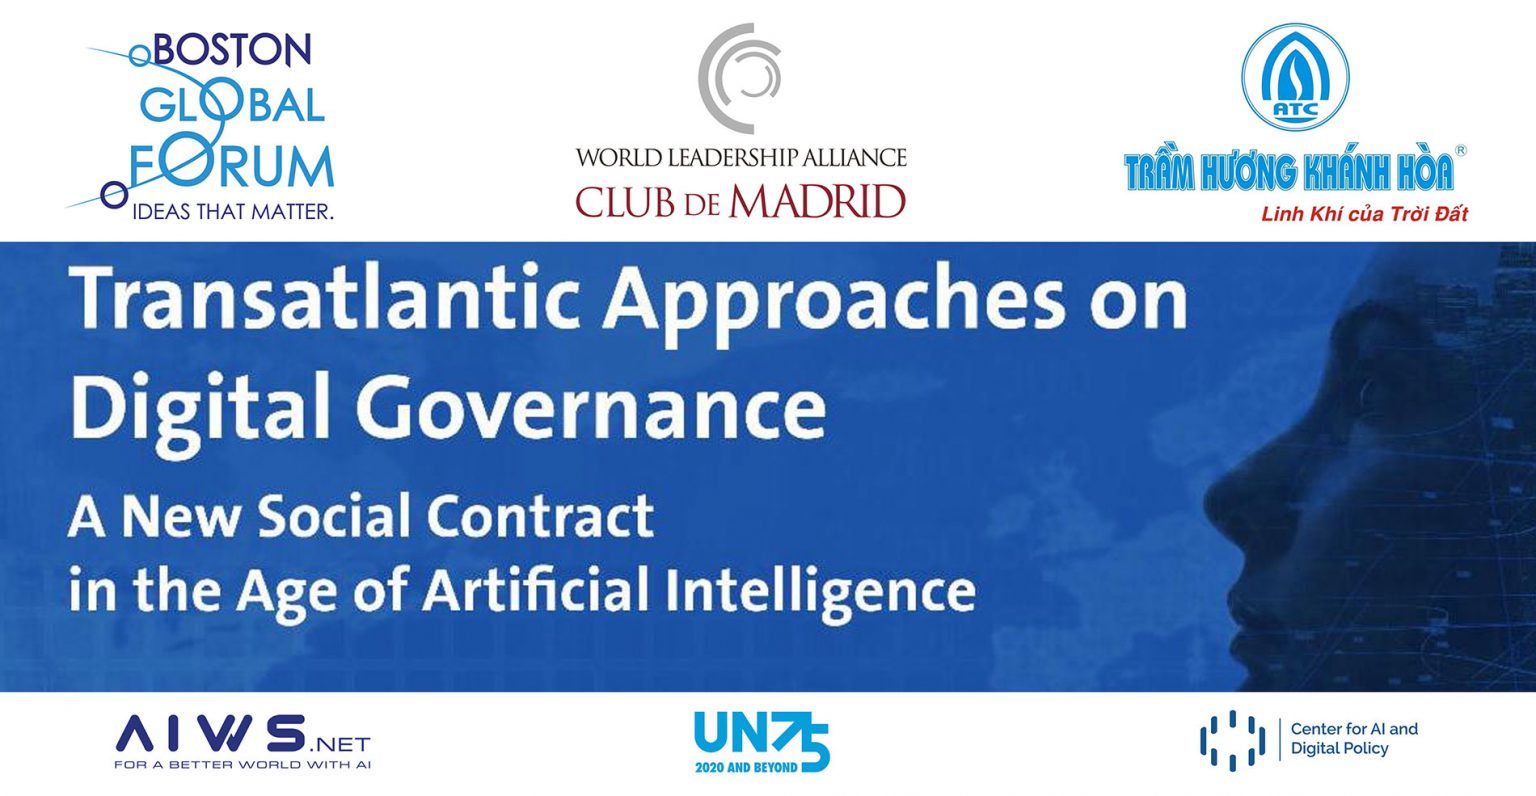 Transatlantic Approaches on Digital Governance: A New Social Contract in the Age of Artificial Intelligence